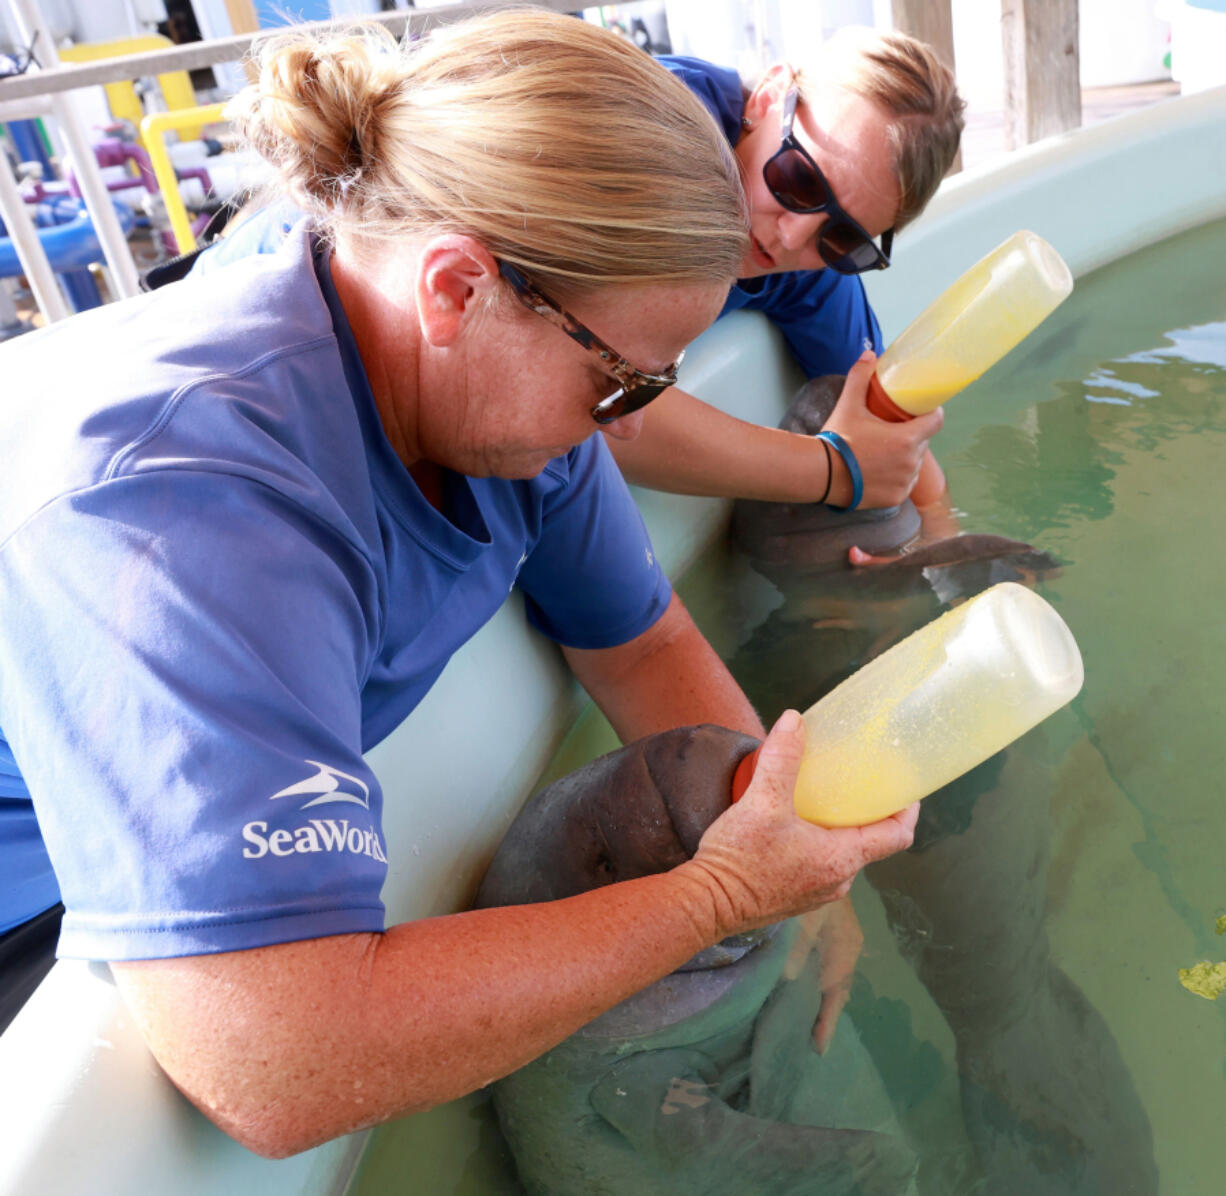 SeaWorld Orlando Animal Rescue Team specialists Becca Downey (left) and Ashley Killo feed the two babies in the Manatee Rehabilitation Area of the park?s backstage Rescue Center, photographed Thursday, August 5, 2021. In July, the Florida Fish and Wildlife Commission (FWC) reported 866 manatee deaths so far in 2021 ?? the highest death toll ever recorded in the state in a single year.